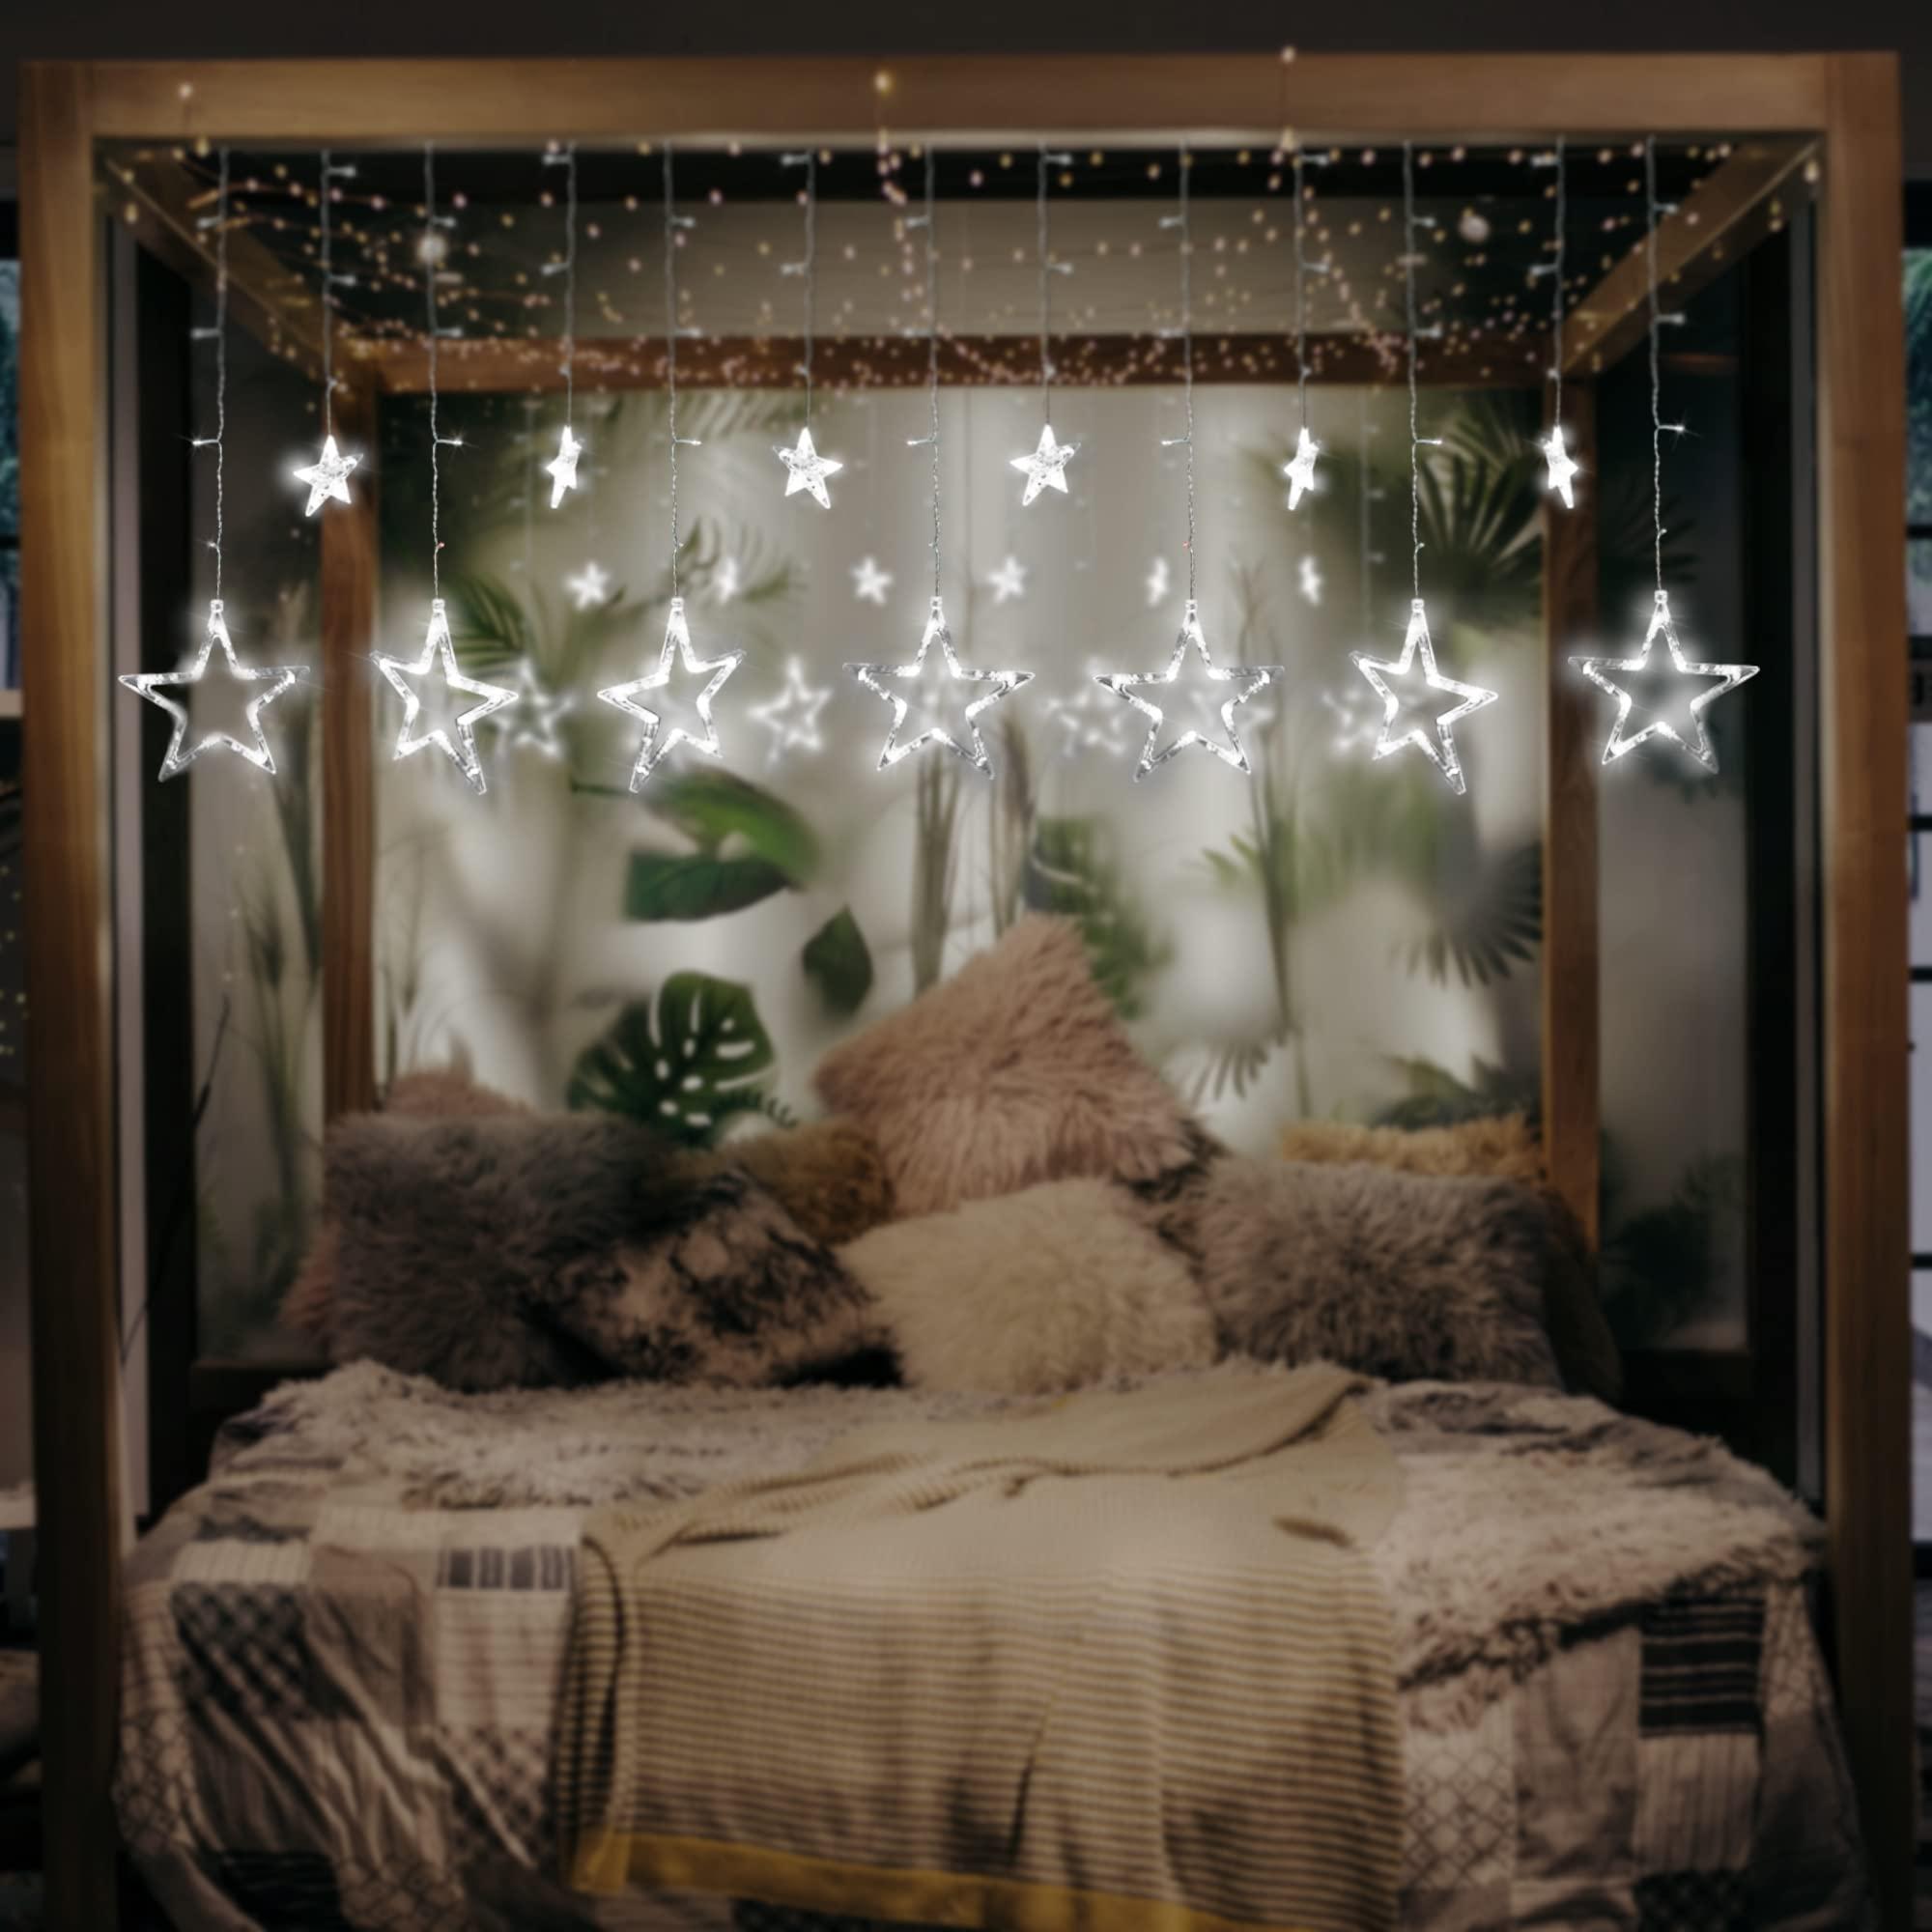 12 Star Curtain Lights with Remote Control 138 LEDs Fairy Light 8 Lighting Modes USB Powered for Bedroom Garden Party Wedding Christmas, Ideale Gift for Family Friends (RGB) 3